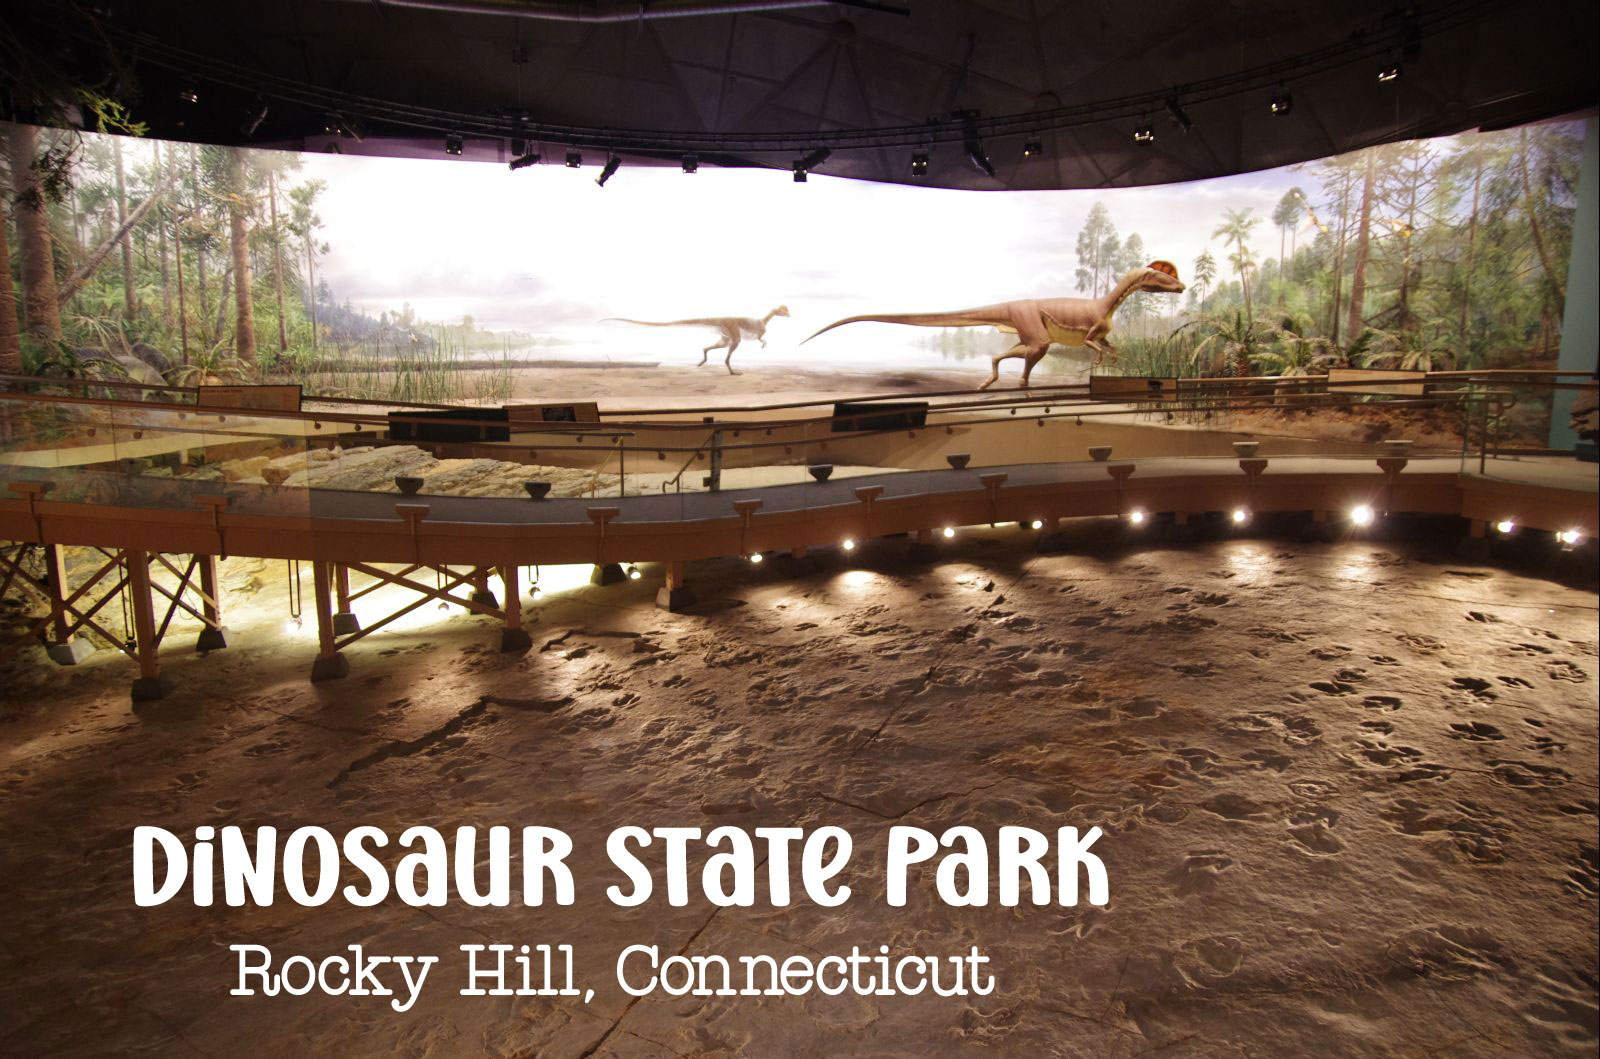 All About Dinosaur State Park and Arboretum